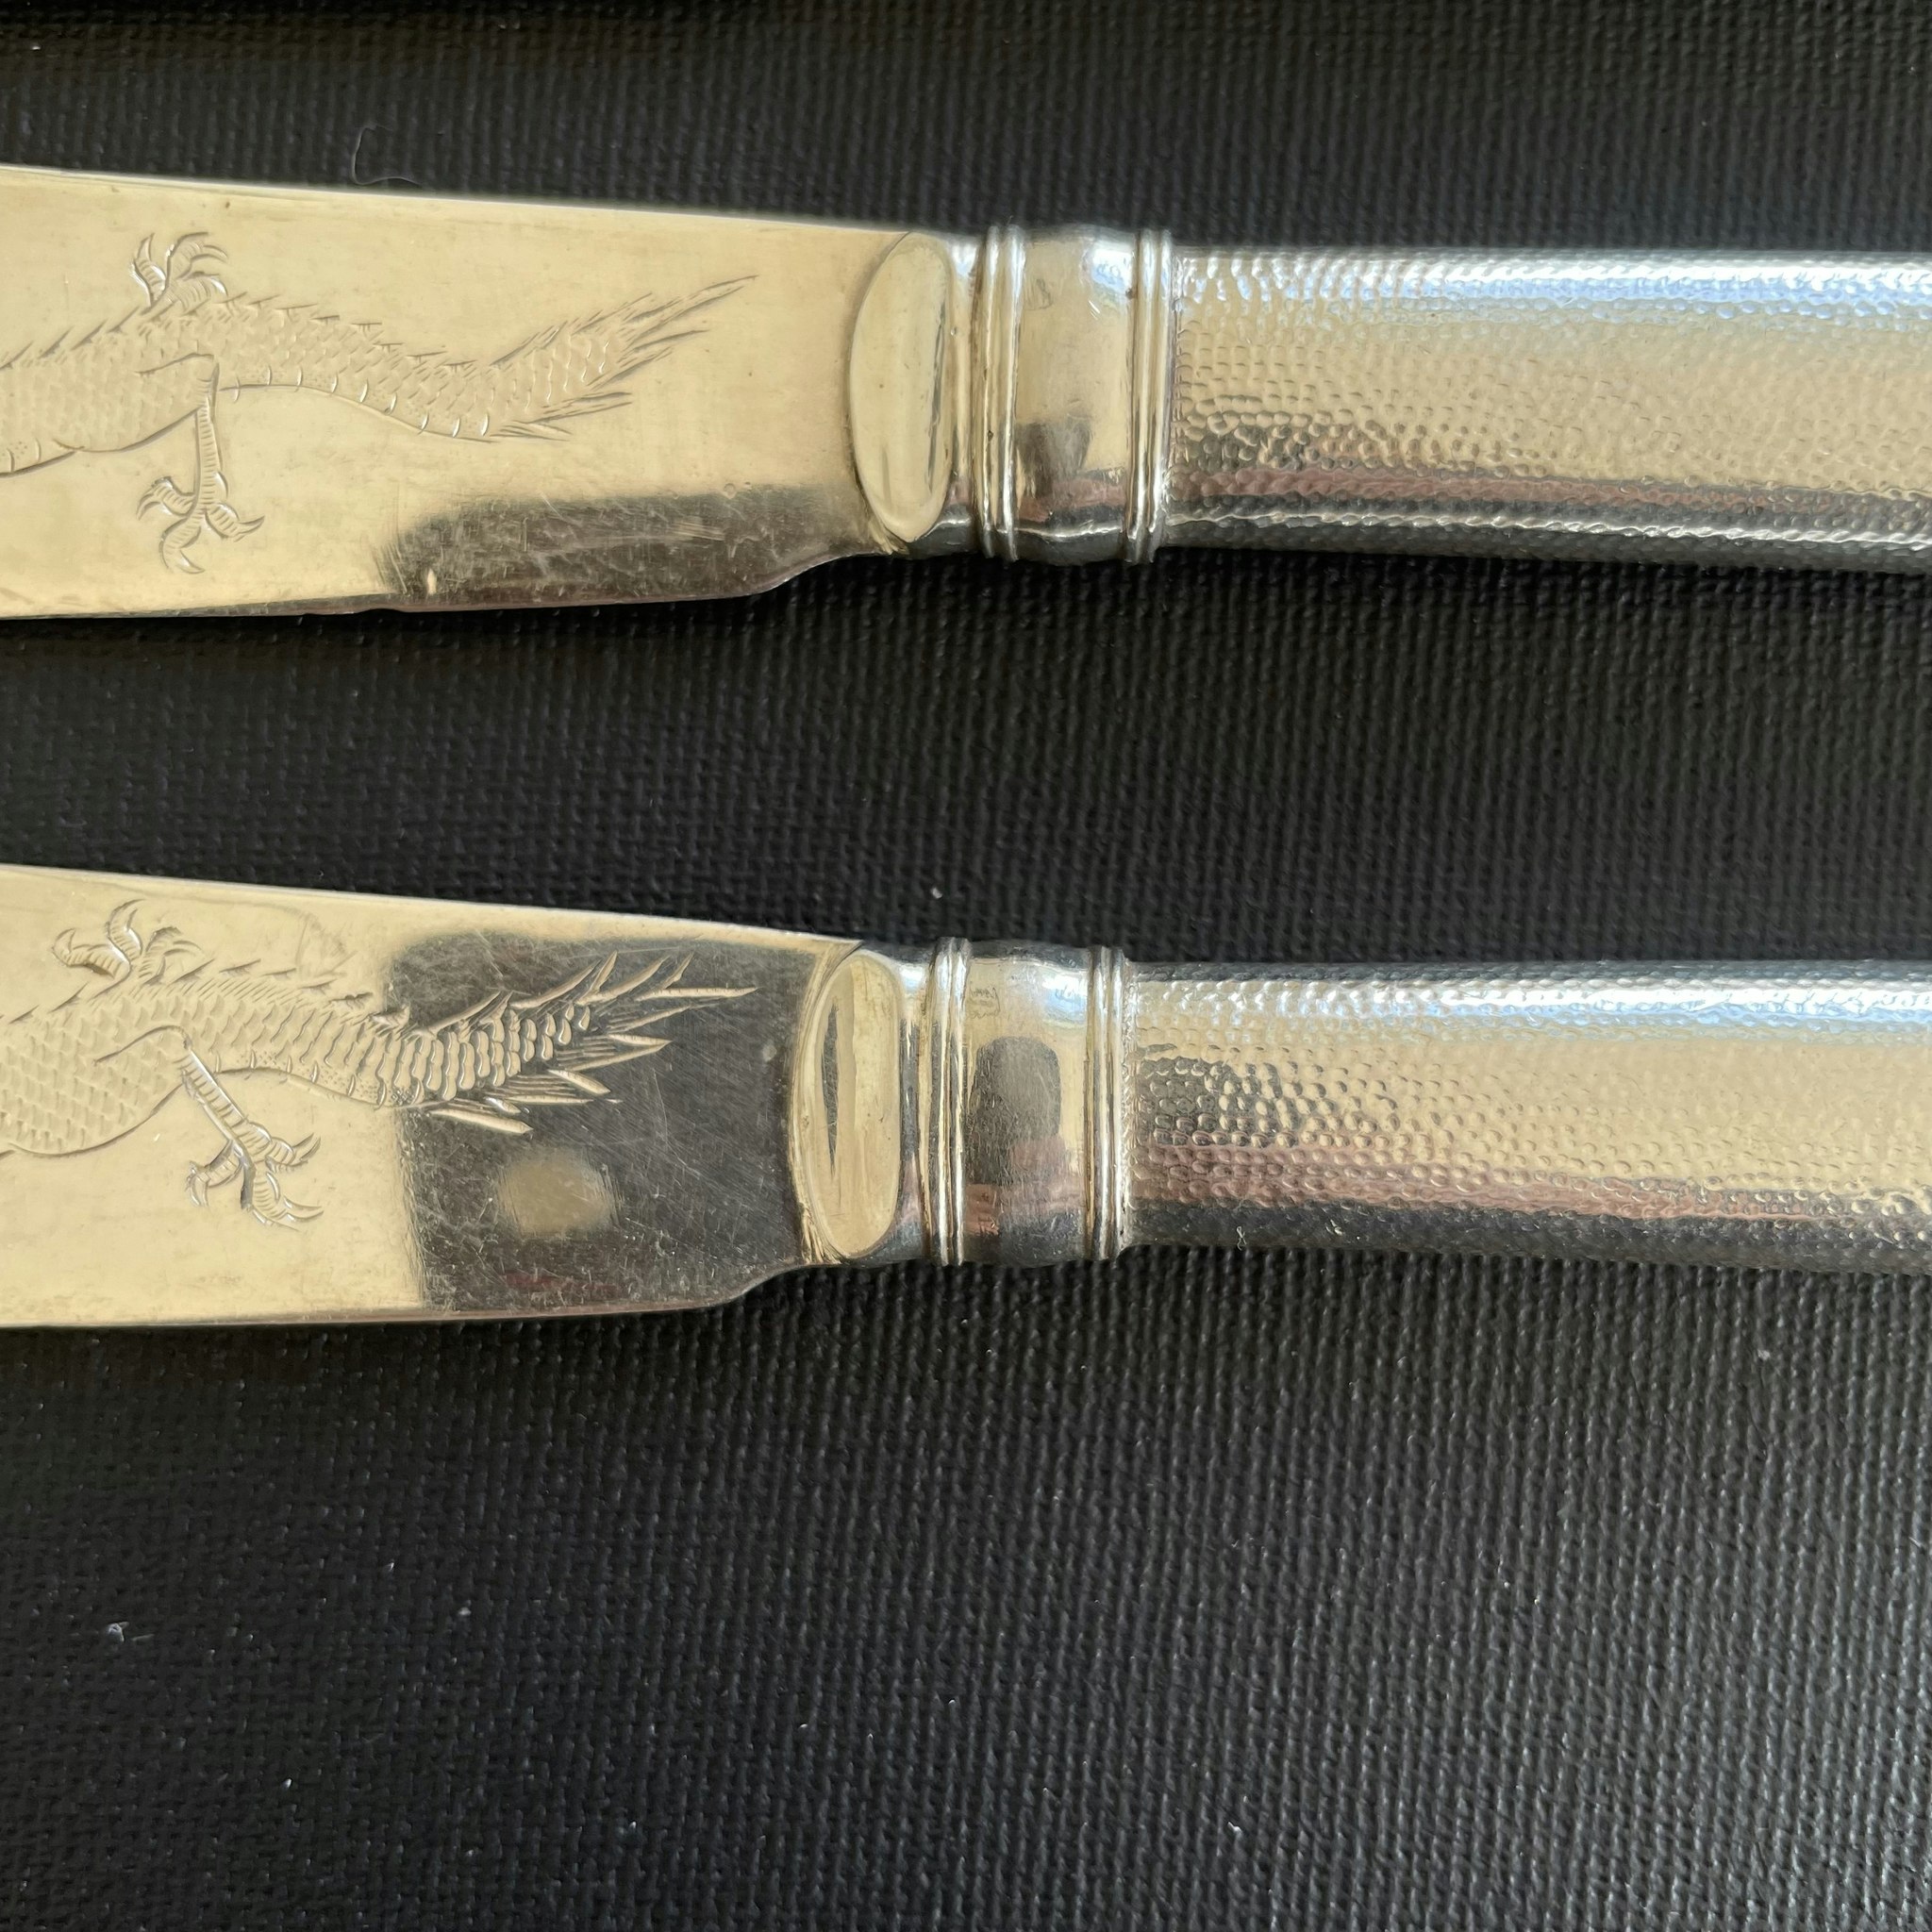 Antique Chinese export silver cutlery set, ZEE SUNG company, Shanghai, 1900-1940